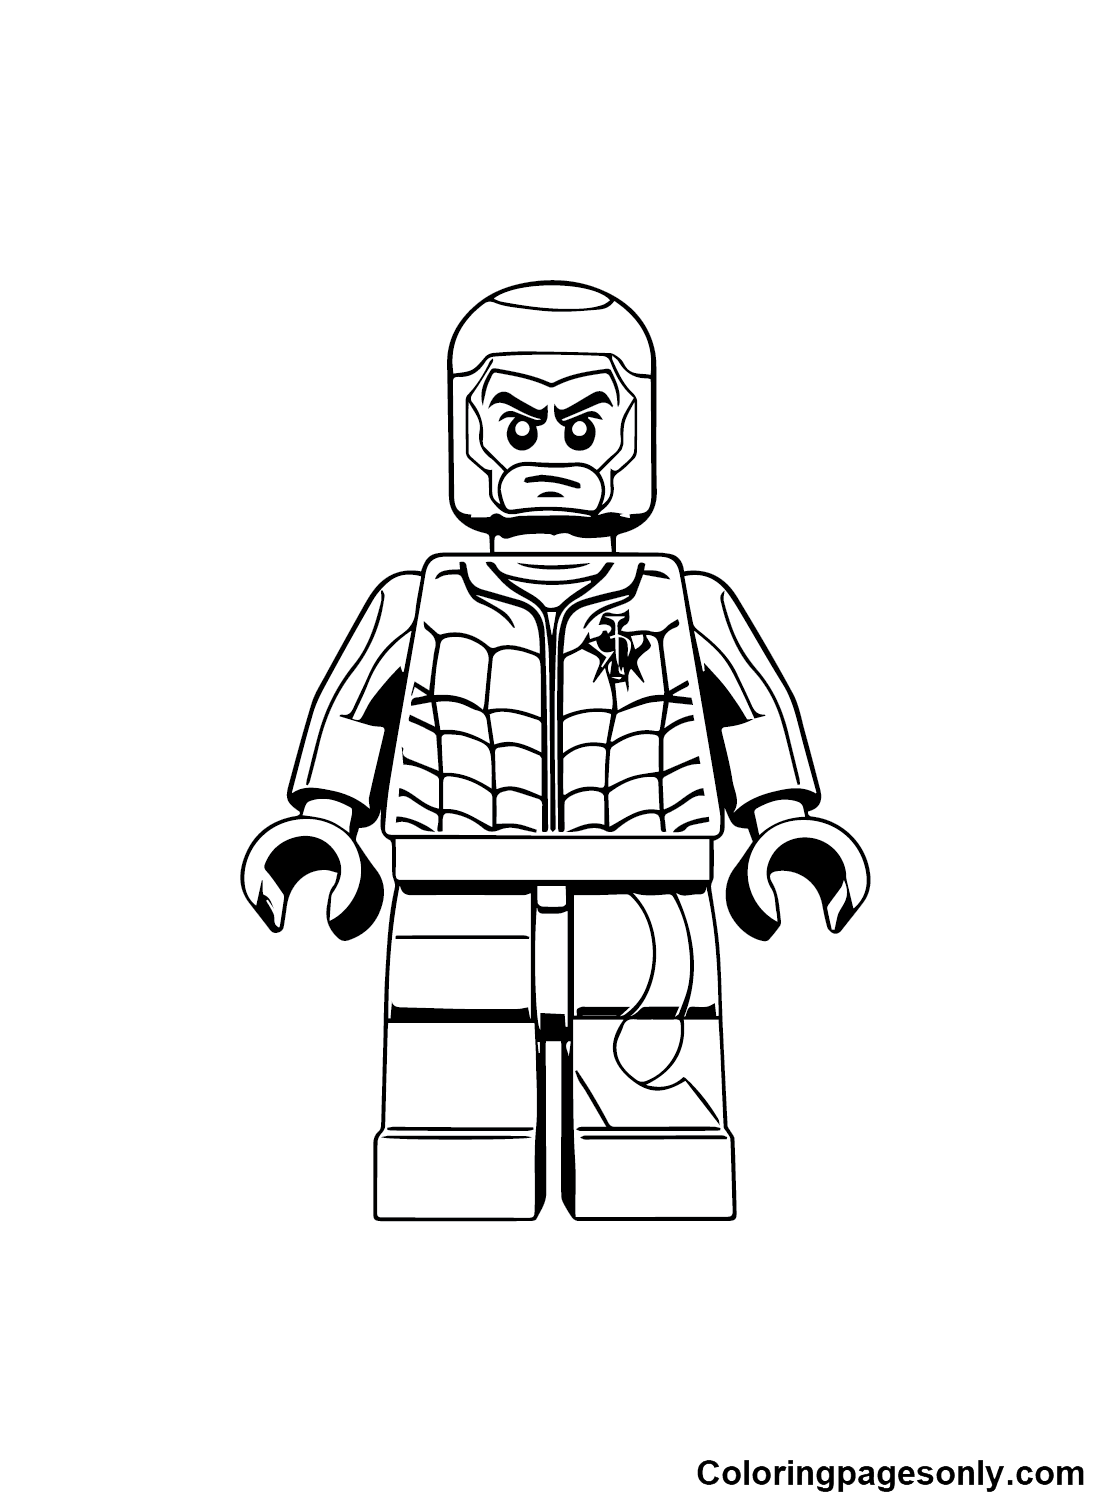 Spiderman Lego Coloring Page